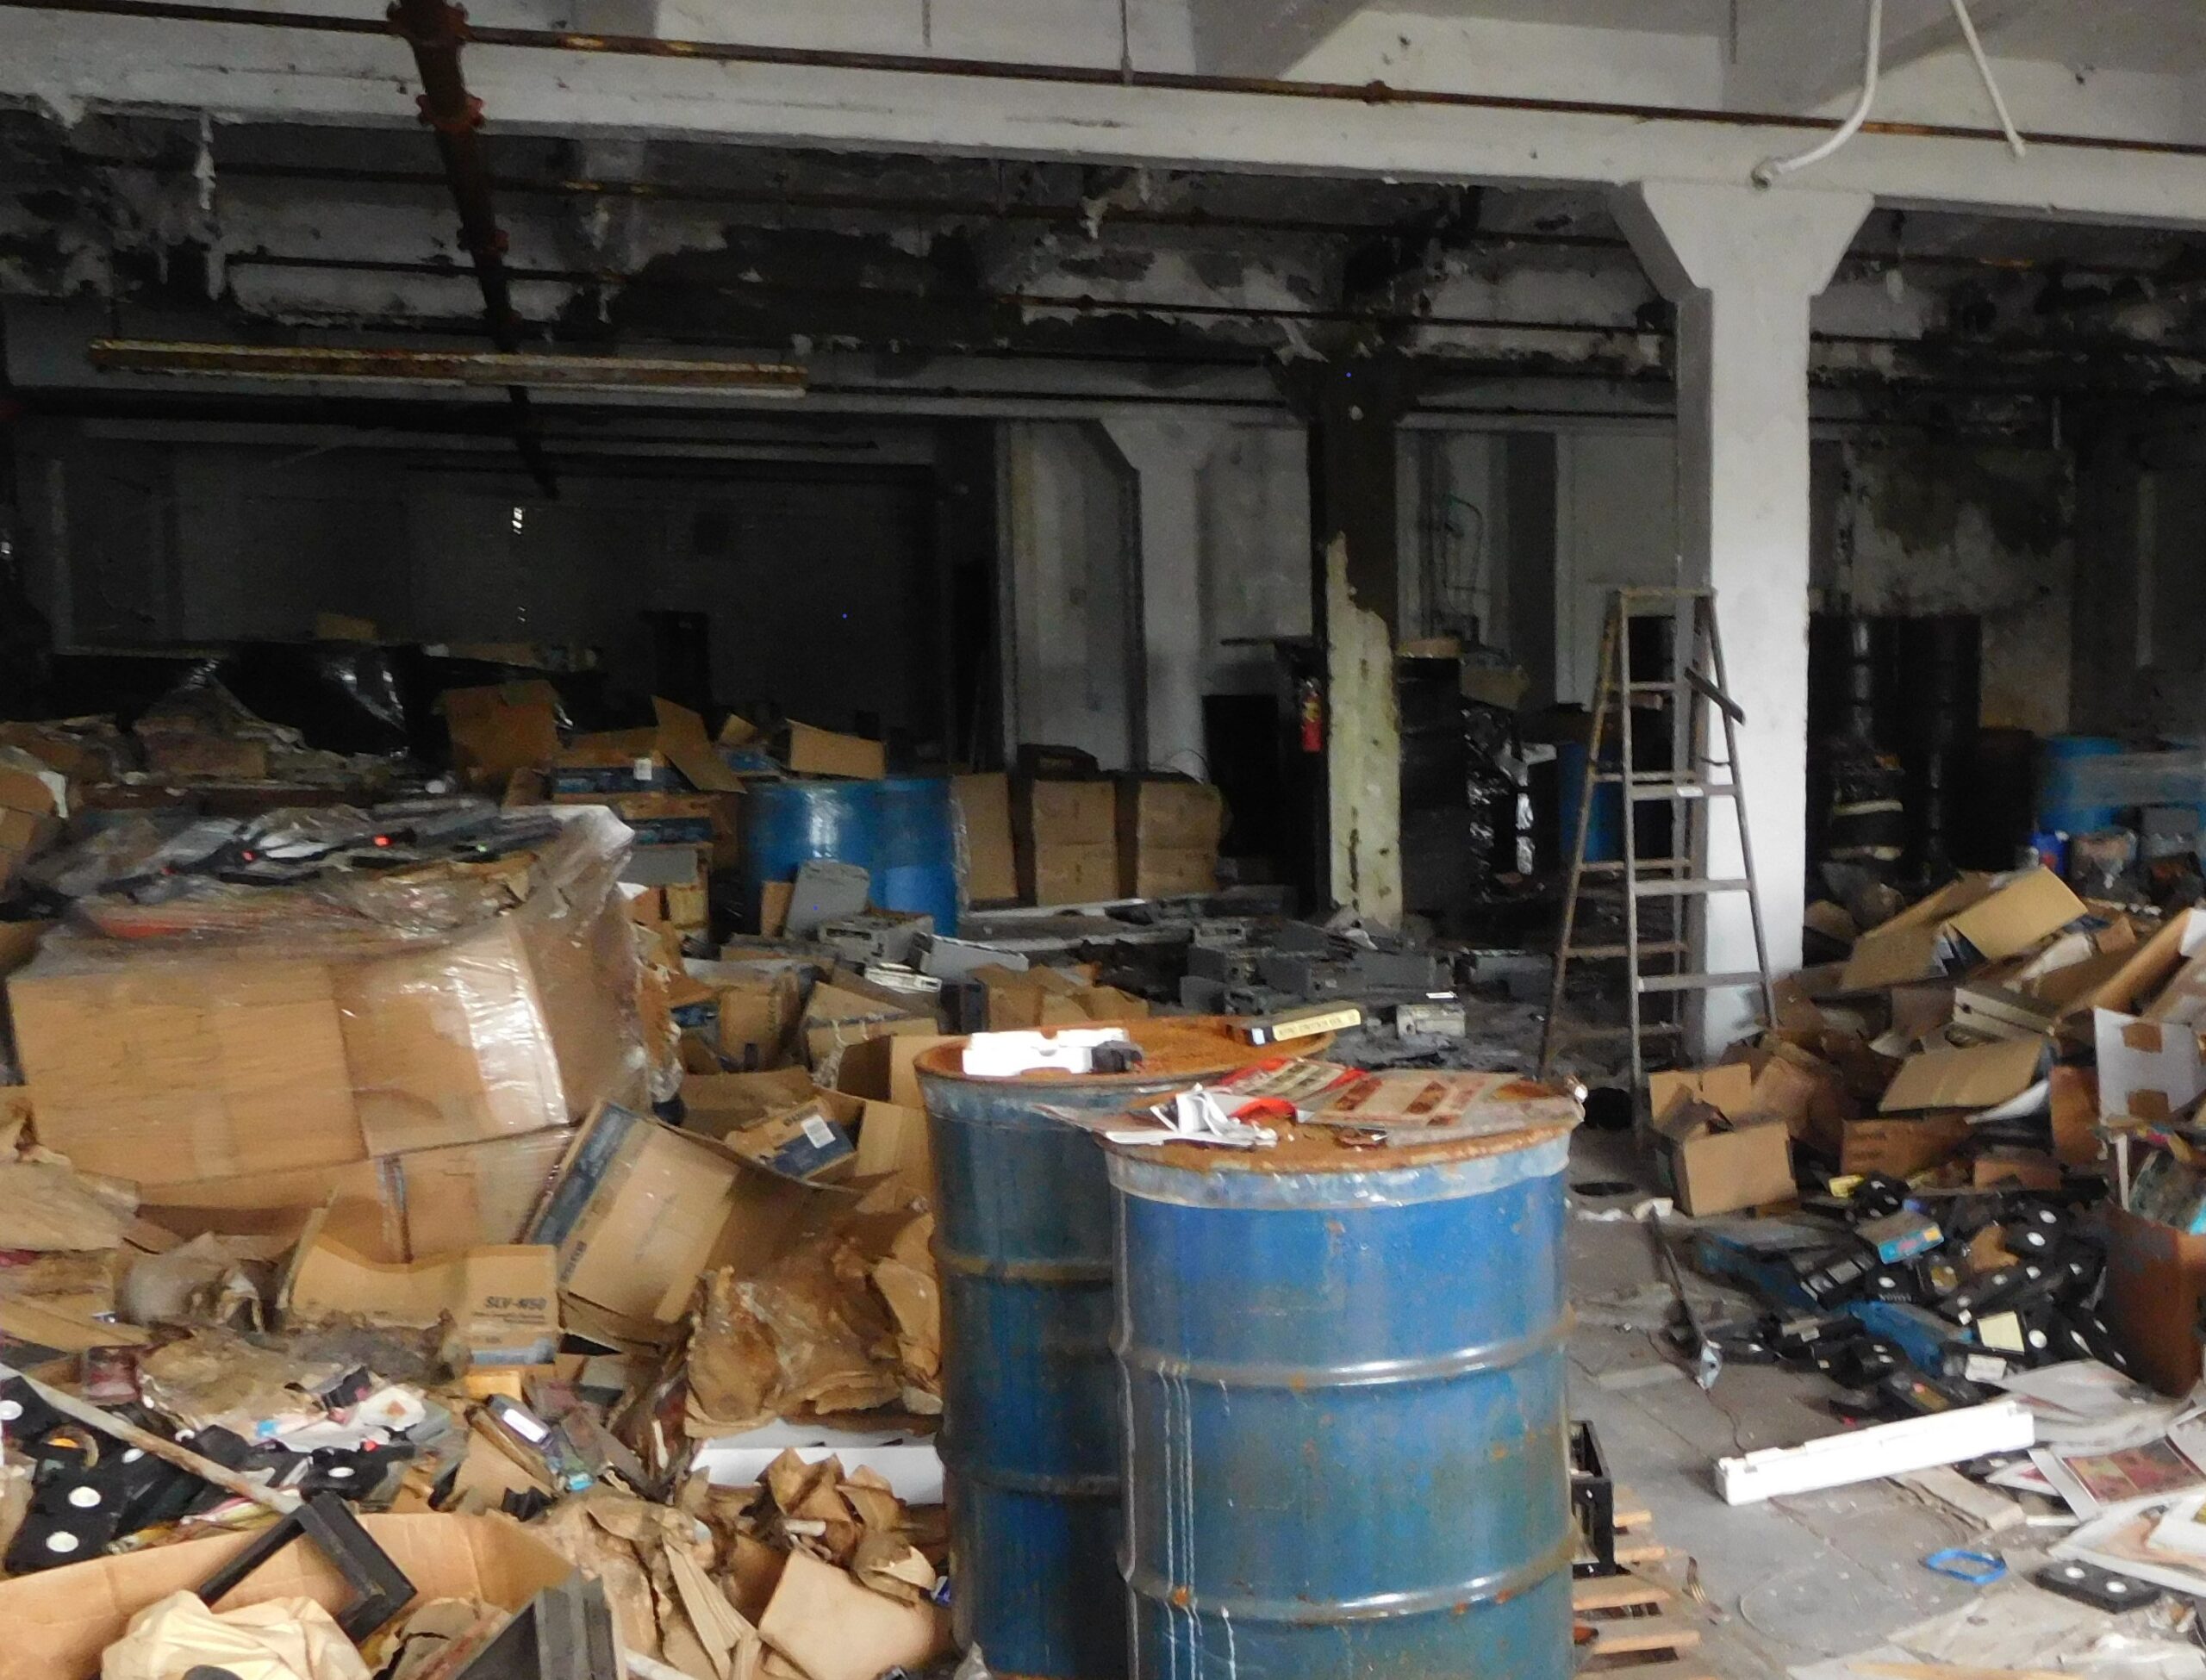 Full-property-cleanout business and warehouse services in orange county los angeles junkeez junk removal